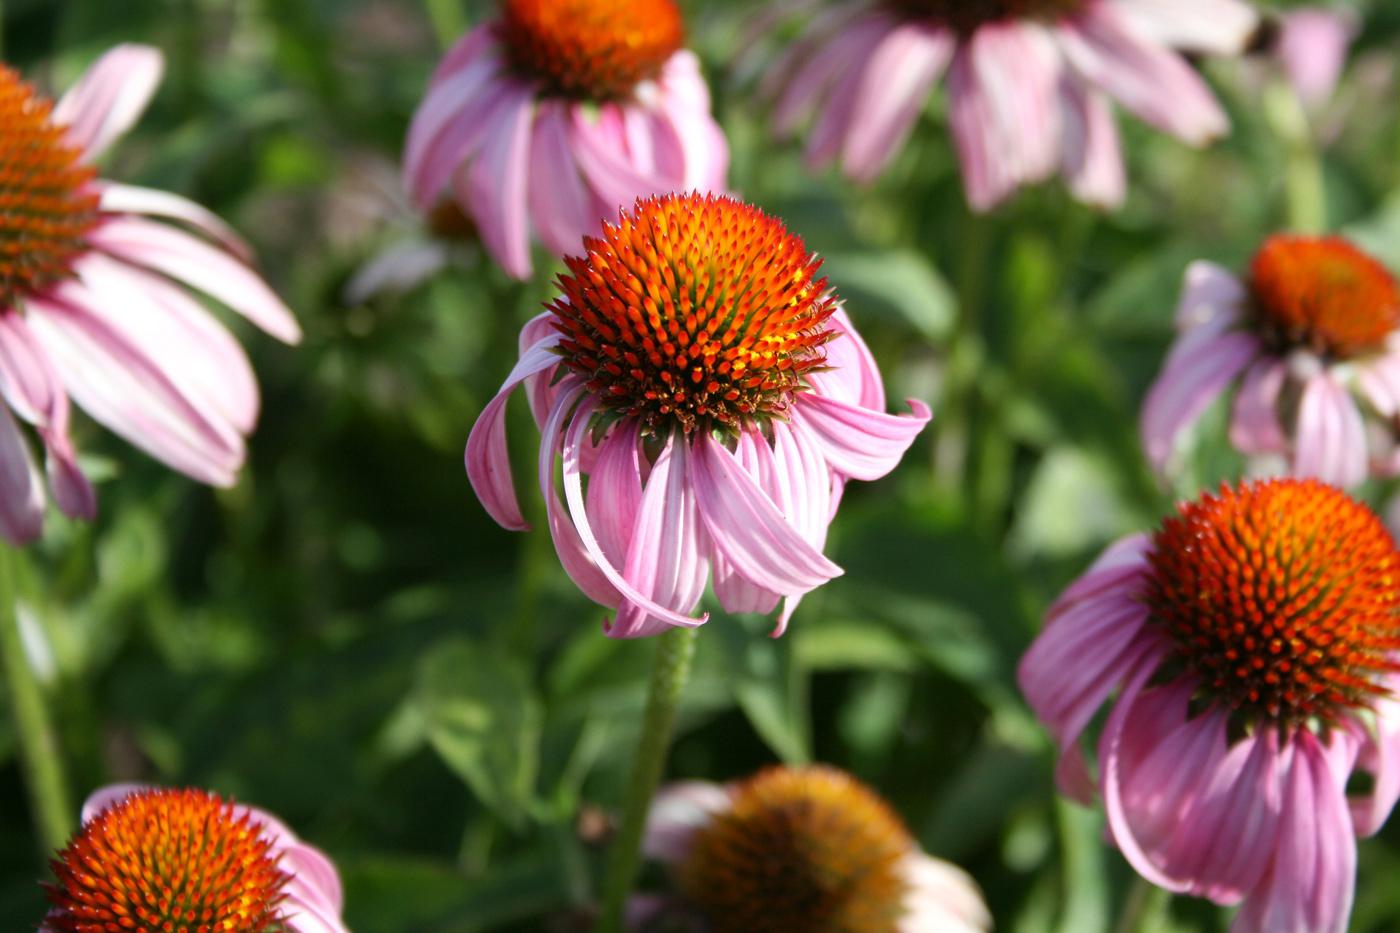 Purple coneflowers, such as this Bright Star, are native perennials that can really make a statement in gardens. (Photo by Gary Bachman)